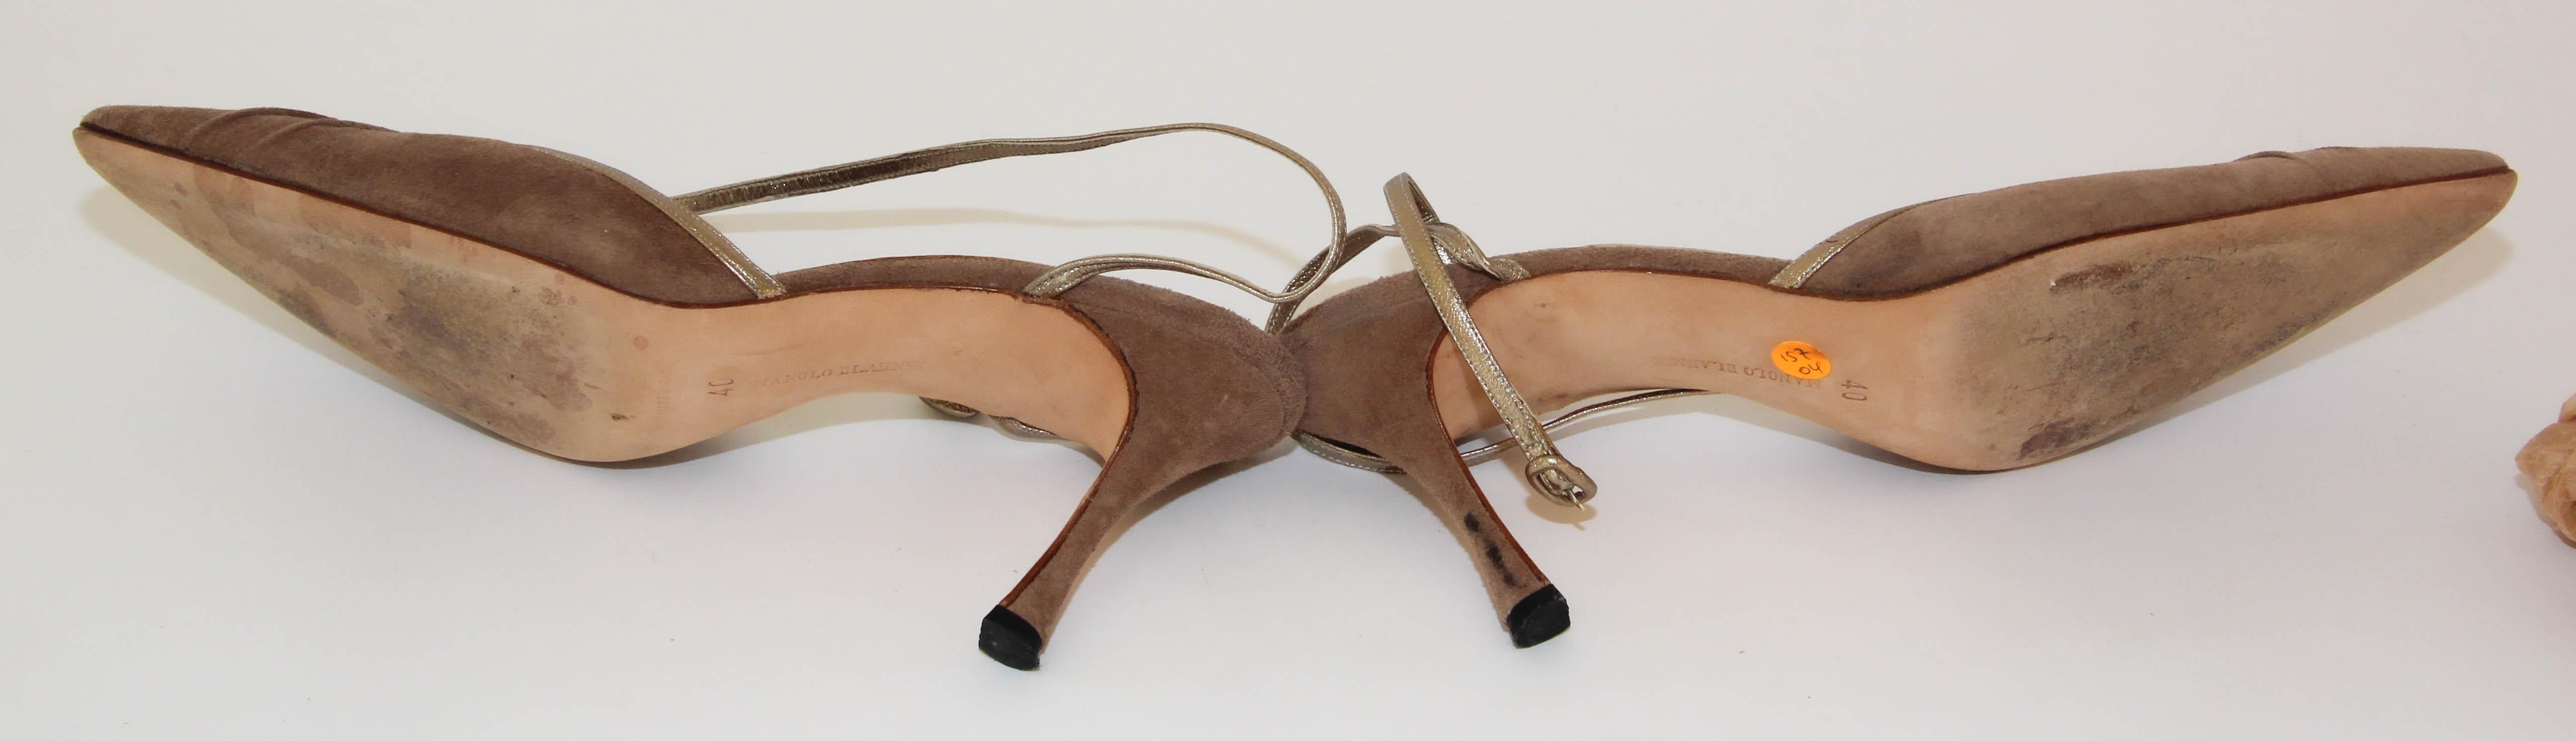 Manolo Blahnik Vintage Suede Shoes With Leather Ankle Straps Size 40 For Sale 8